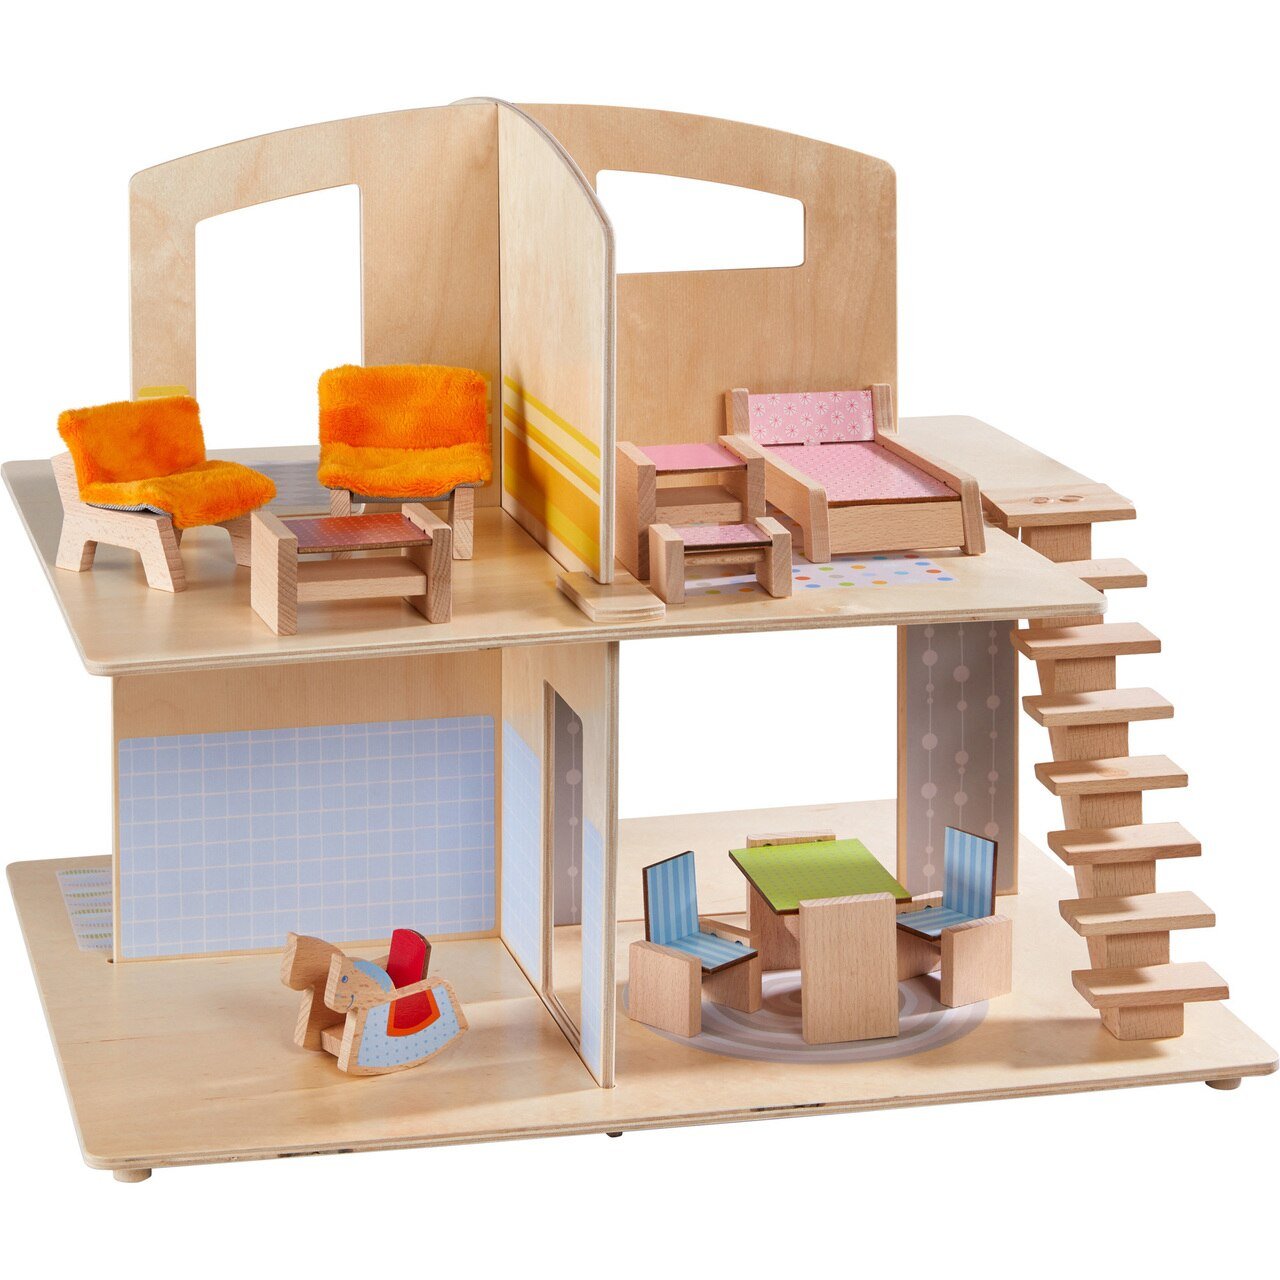 HABA Little Friends Dollhouse Town Villa - Wood Wood Toys Canada's Favourite Montessori Toy Store